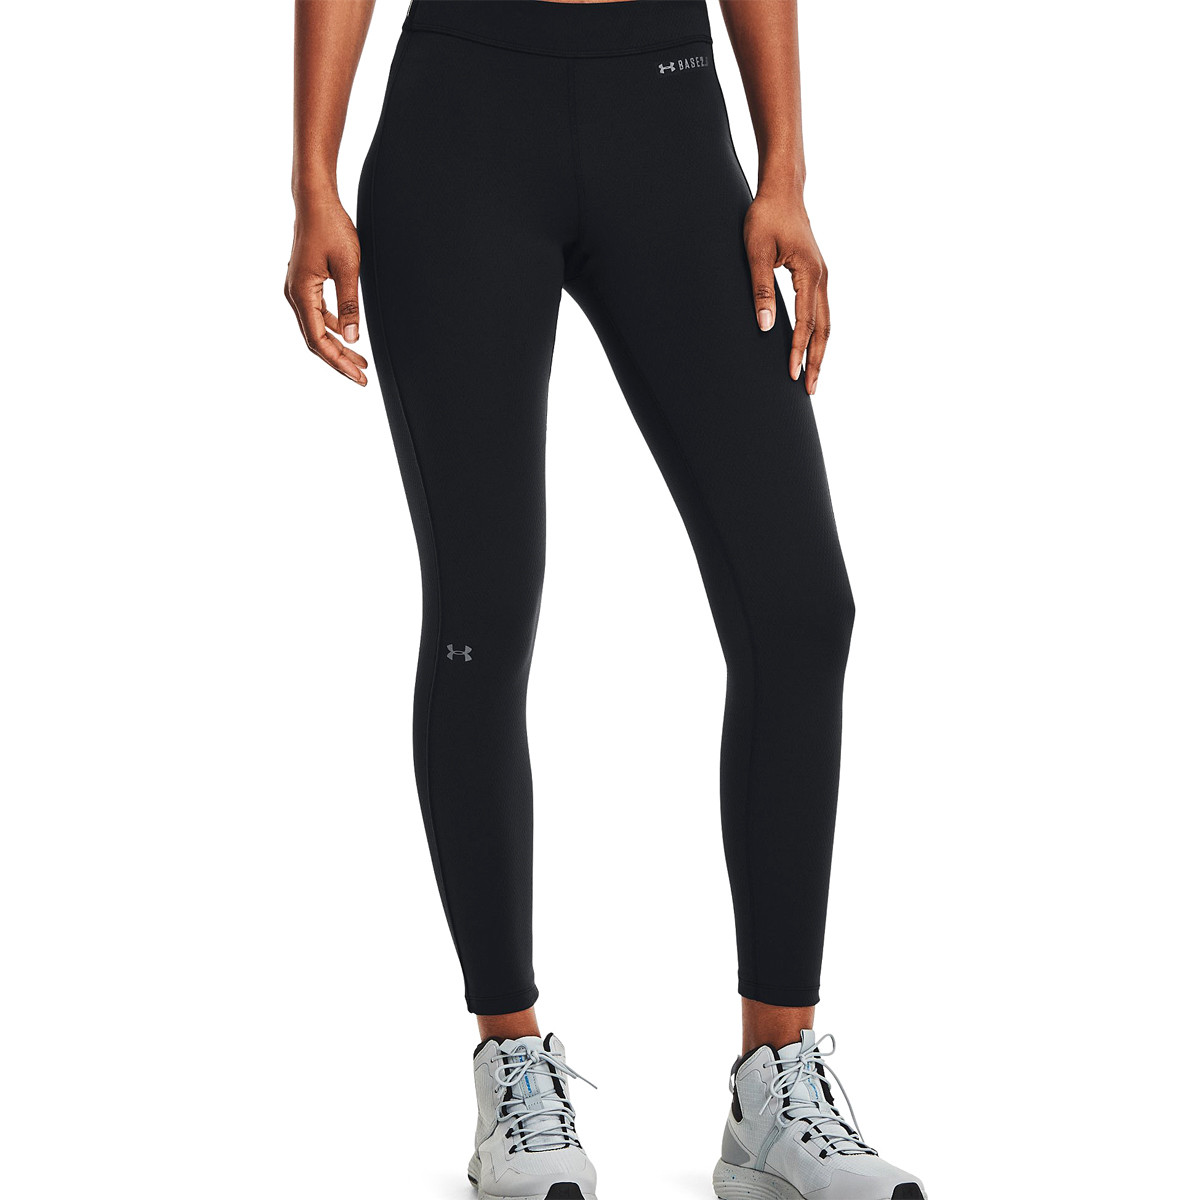 COLLANT UNDER ARMOUR FEMME COLD GEAR BASE 2.0